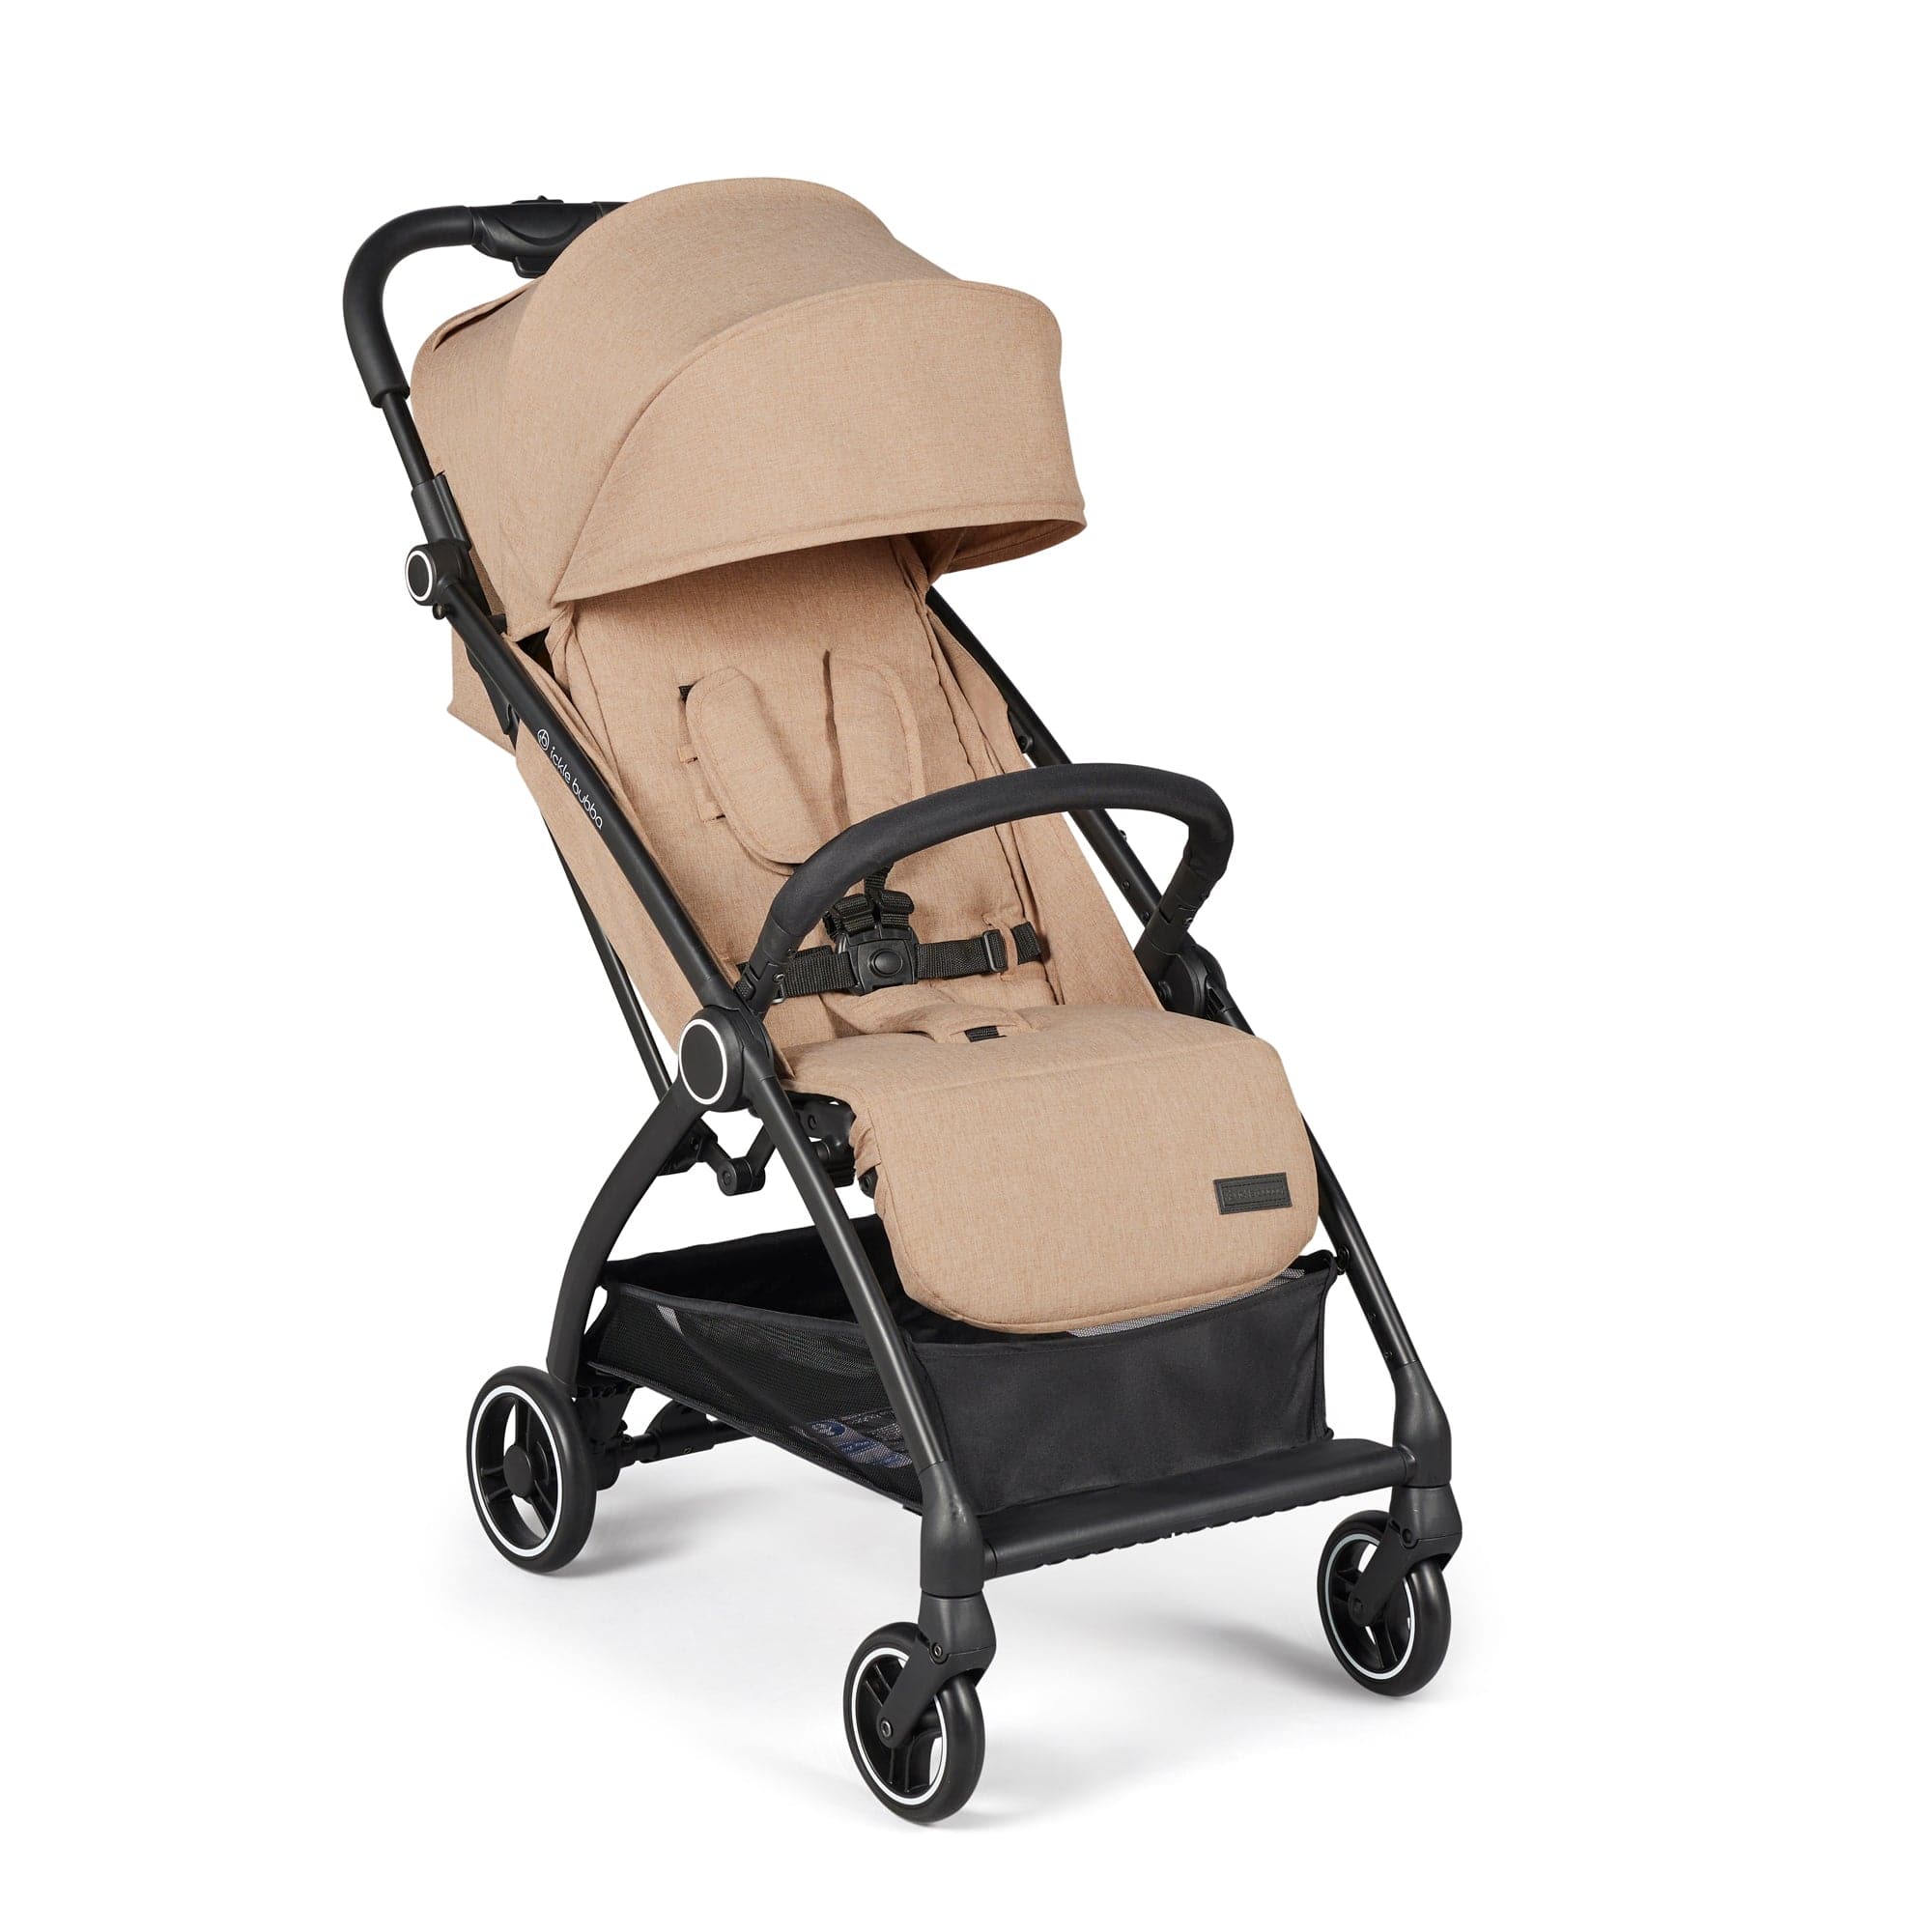 Ickle Bubba Aries Autofold Stroller - Beige - For Your Little One